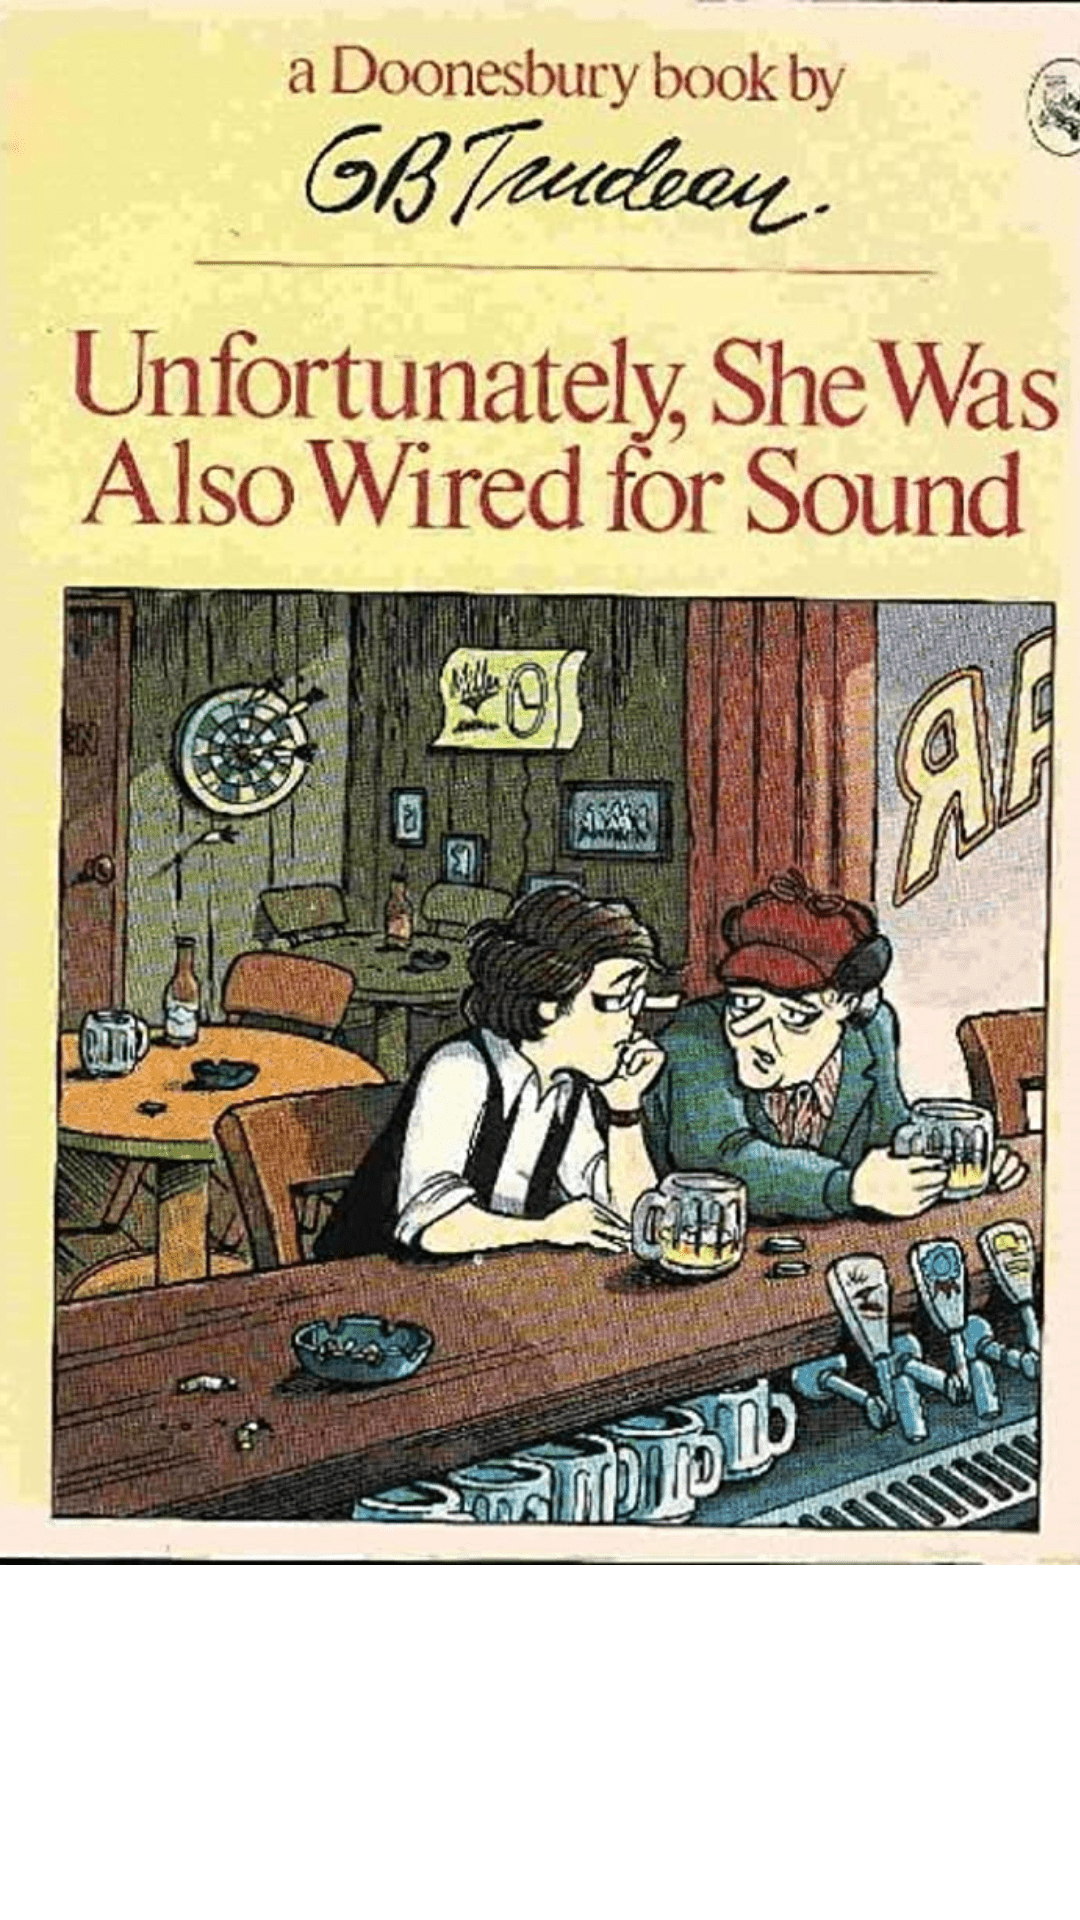 Unfortunately, She Was Also Wired for Sound